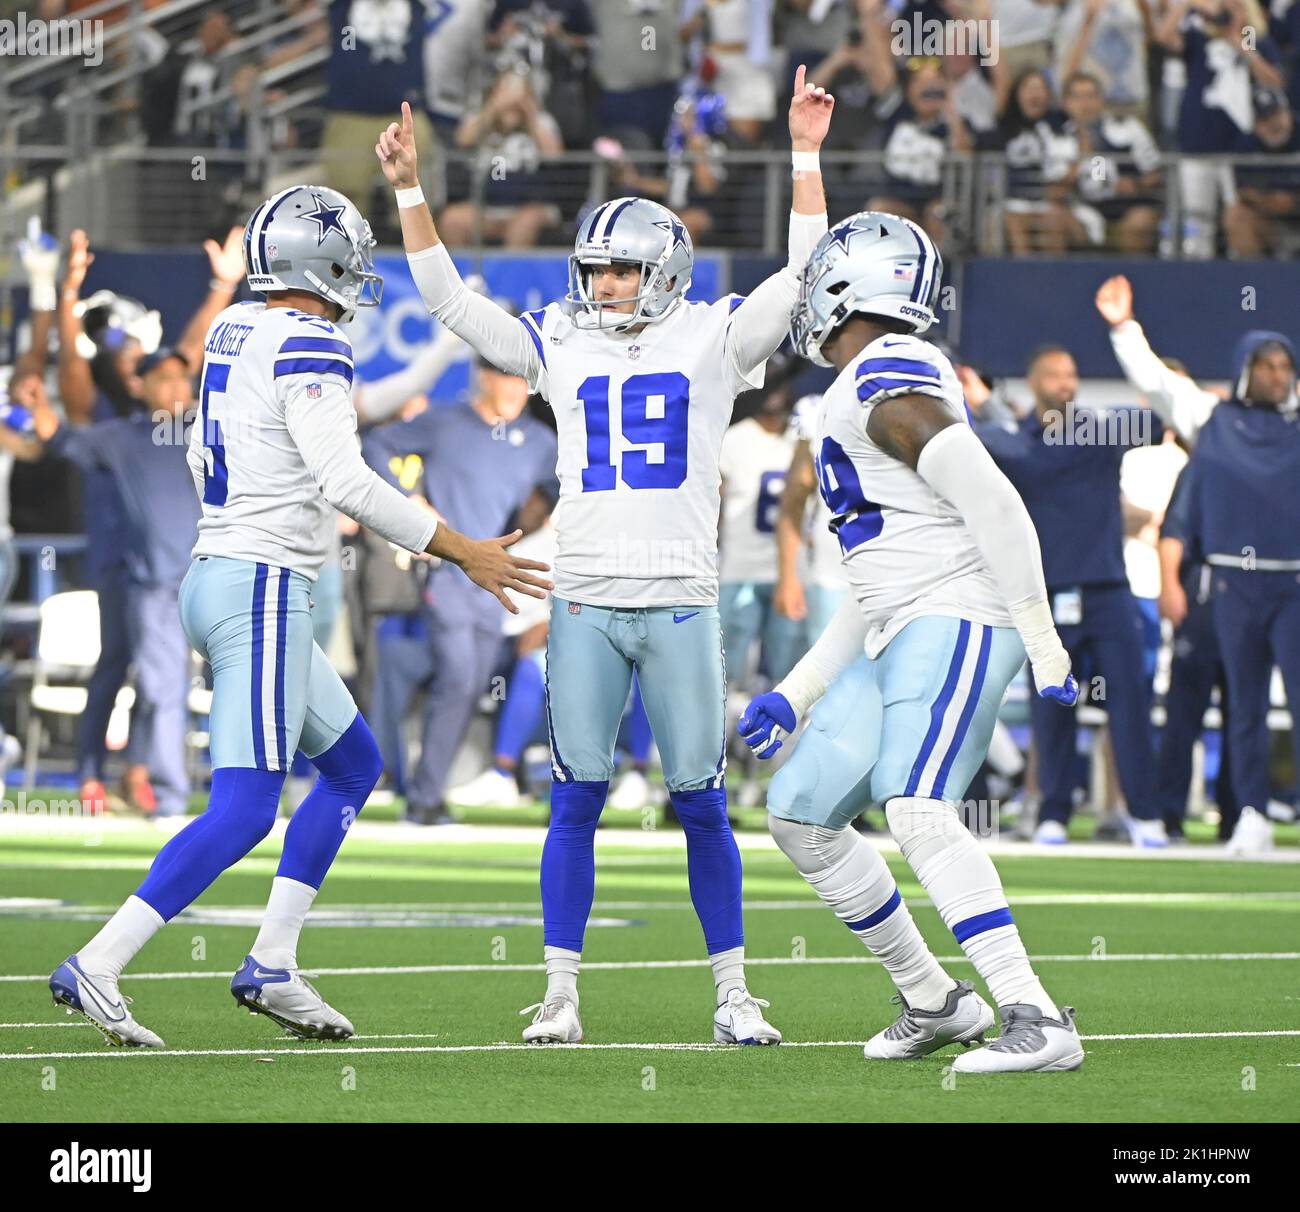 Arlington, United States. 18th Sep, 2022. Dallas Cowboys kicker Brett Maher (19) celebrats his 50-yrd field goal with no time left to beat Cincinnati Bengals 20-17 in their NFL game at AT&T Stadium in Arlington, Texas on Sunday, September 18, 2022 Photo by Ian Halperin/UPI Credit: UPI/Alamy Live News Stock Photo